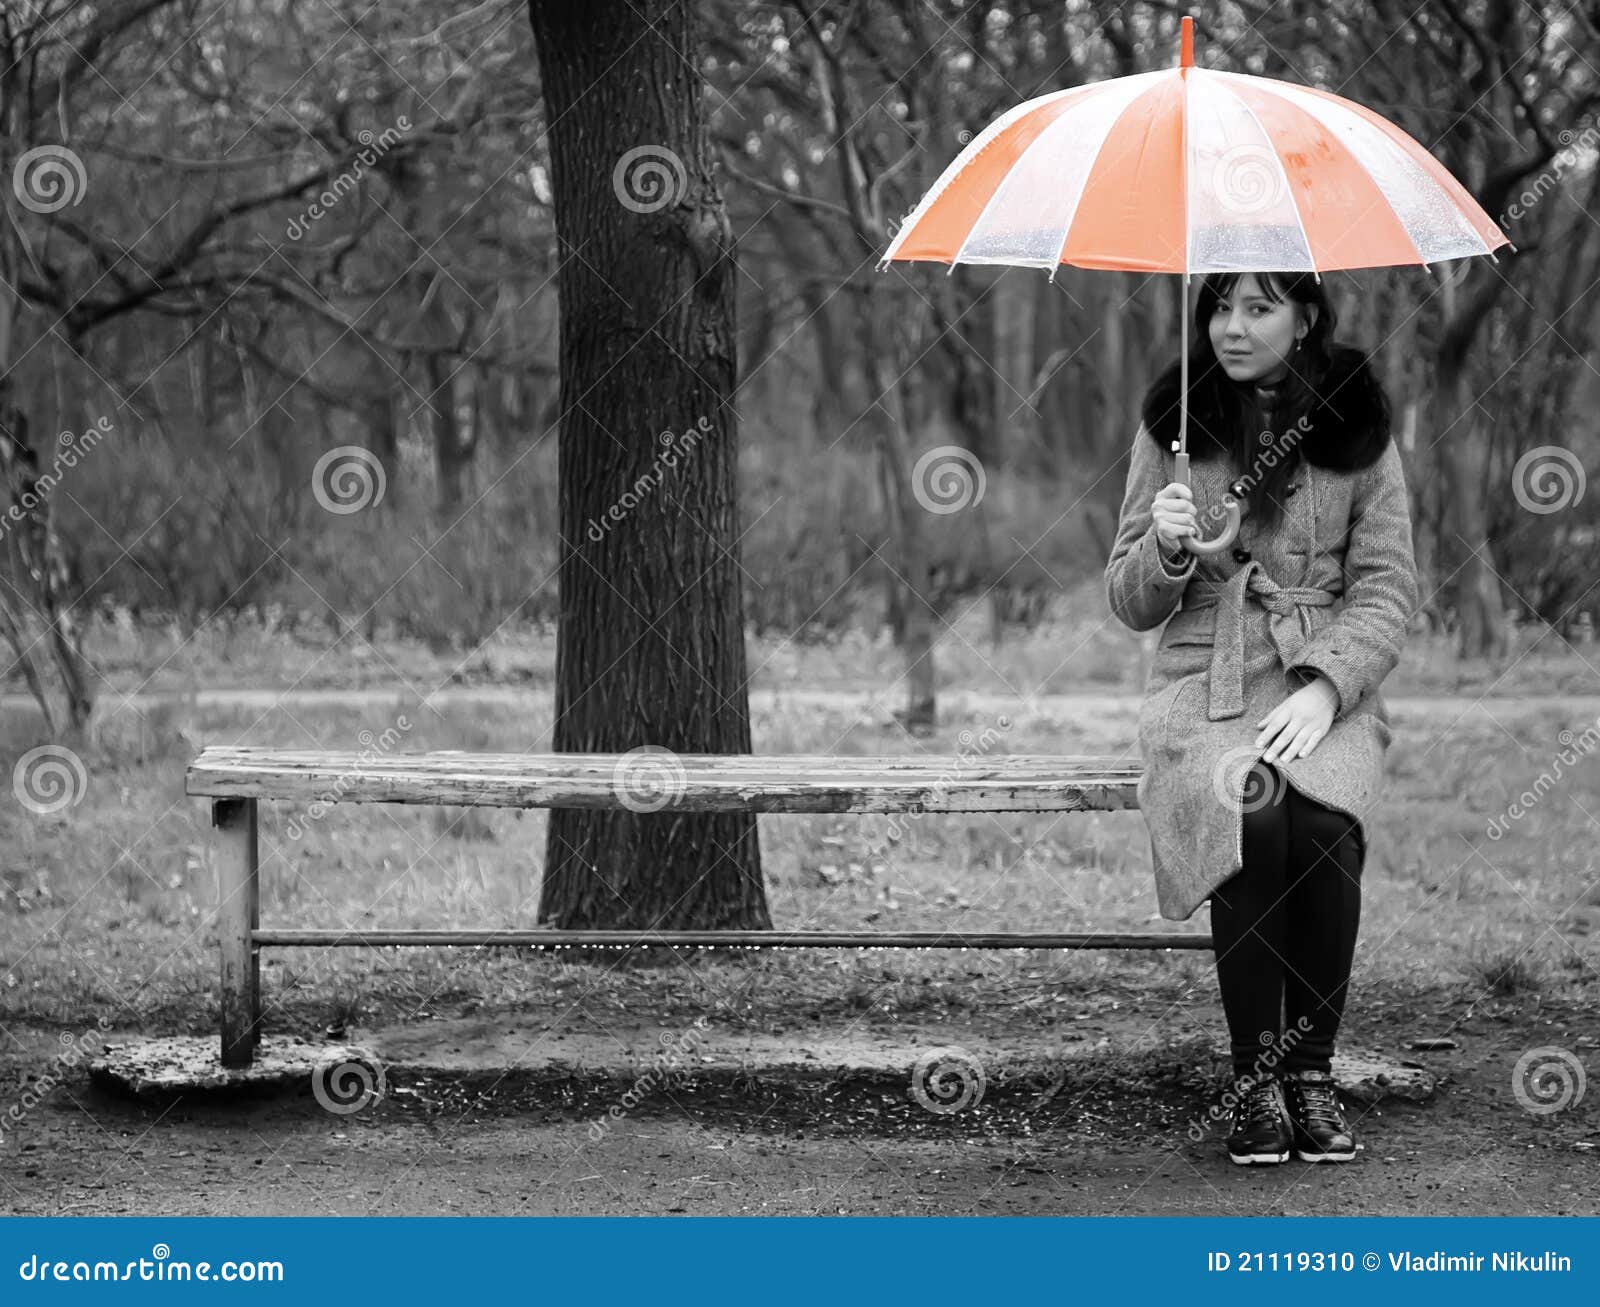 Alone Girl Sitting at Bench Stock Photo - Image of vintage, bench: 21119310